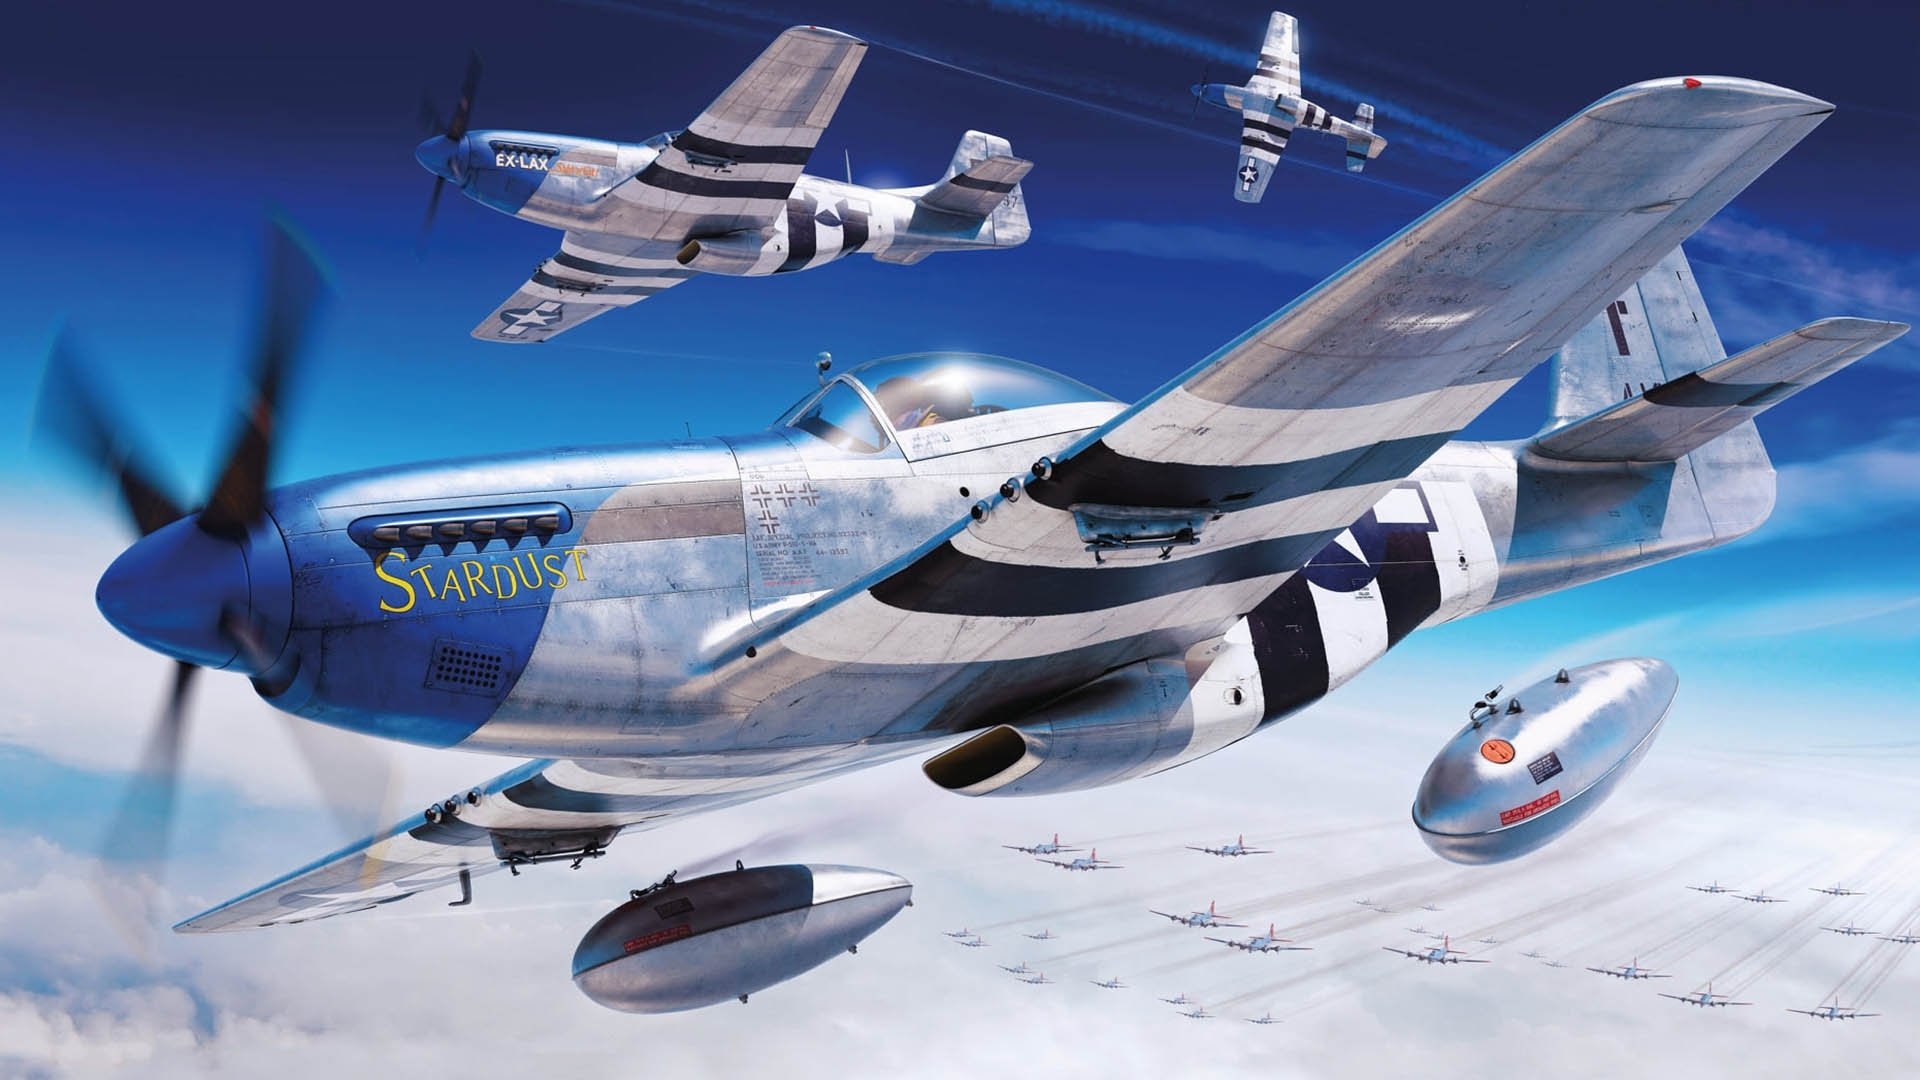 HD wallpaper p51 mustang p51 aircraft airplane aviation fighter  ww2  Wallpaper Flare